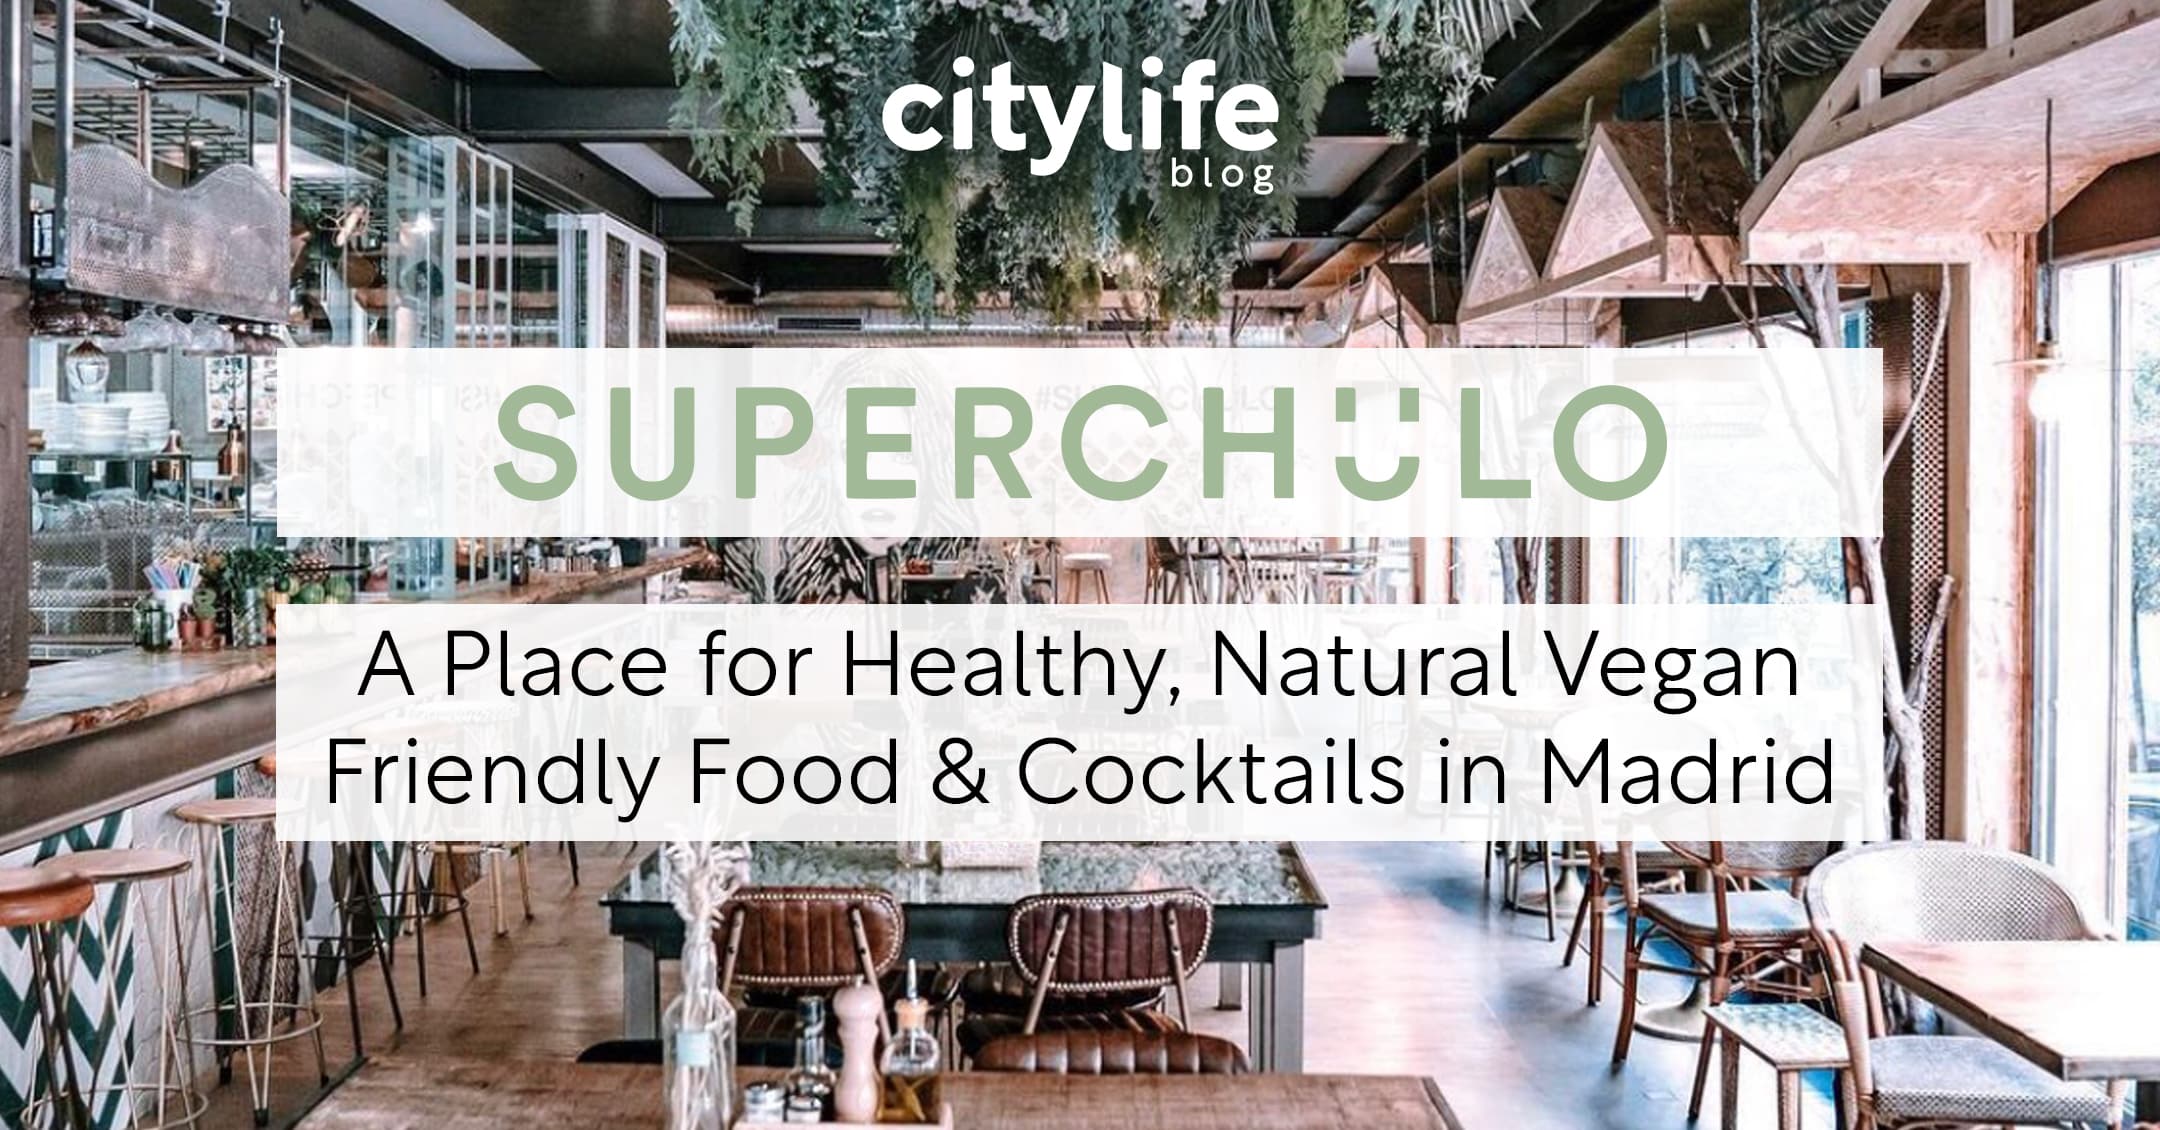 featured-image-superchulo-vegan-healthy-food-cocktails-citylife-madrid